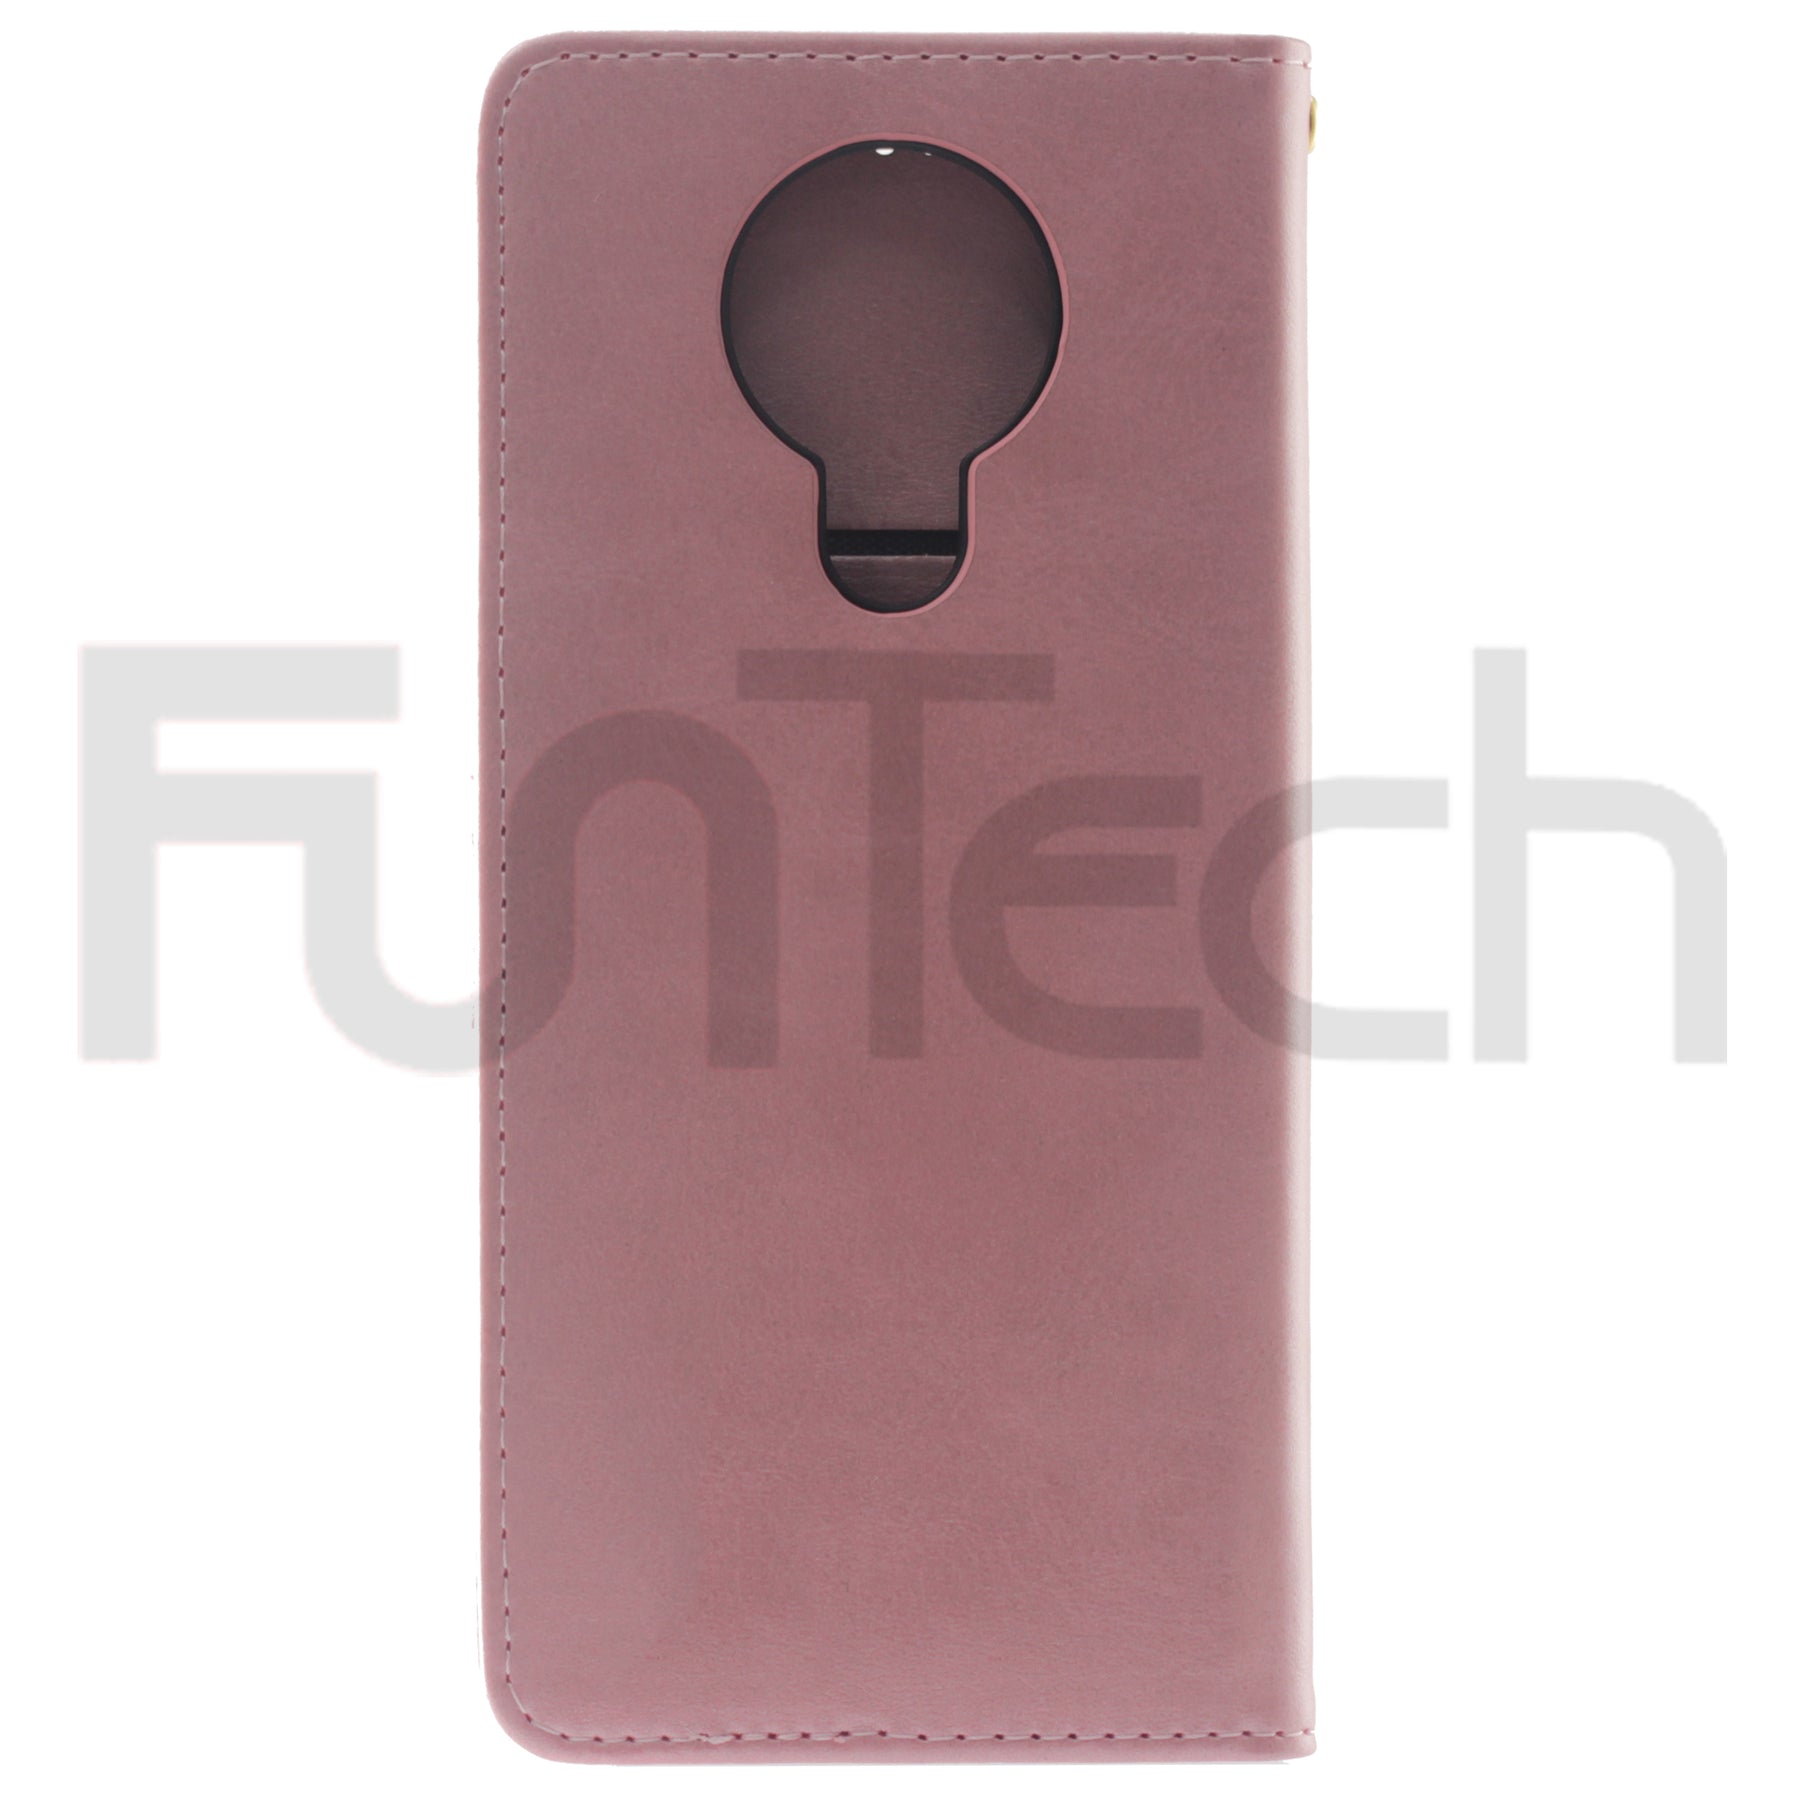 Nokia 5.3, Leather Case, Color Pink.